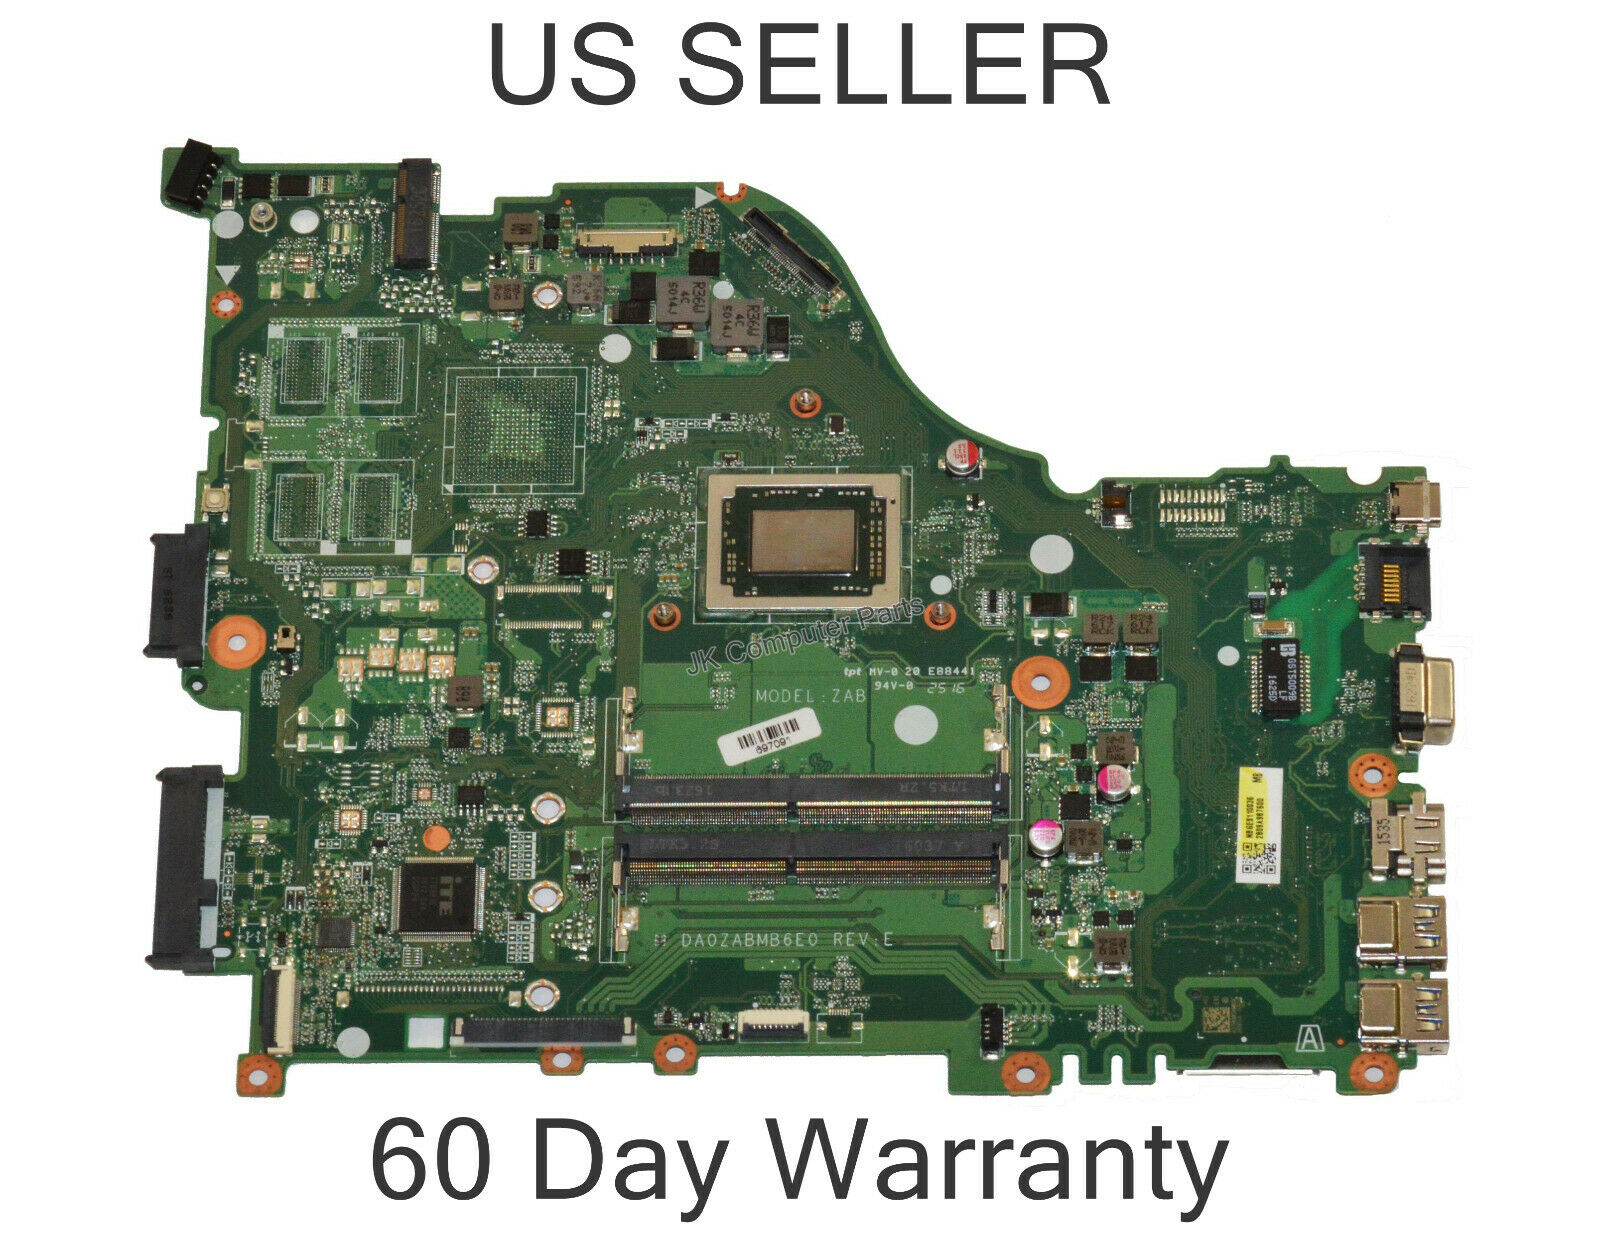 Acer Aspire E5-553 A12-9700P 2.5GHz CPU Motherboard Details: This listing is for an Acer motherboard P/N: